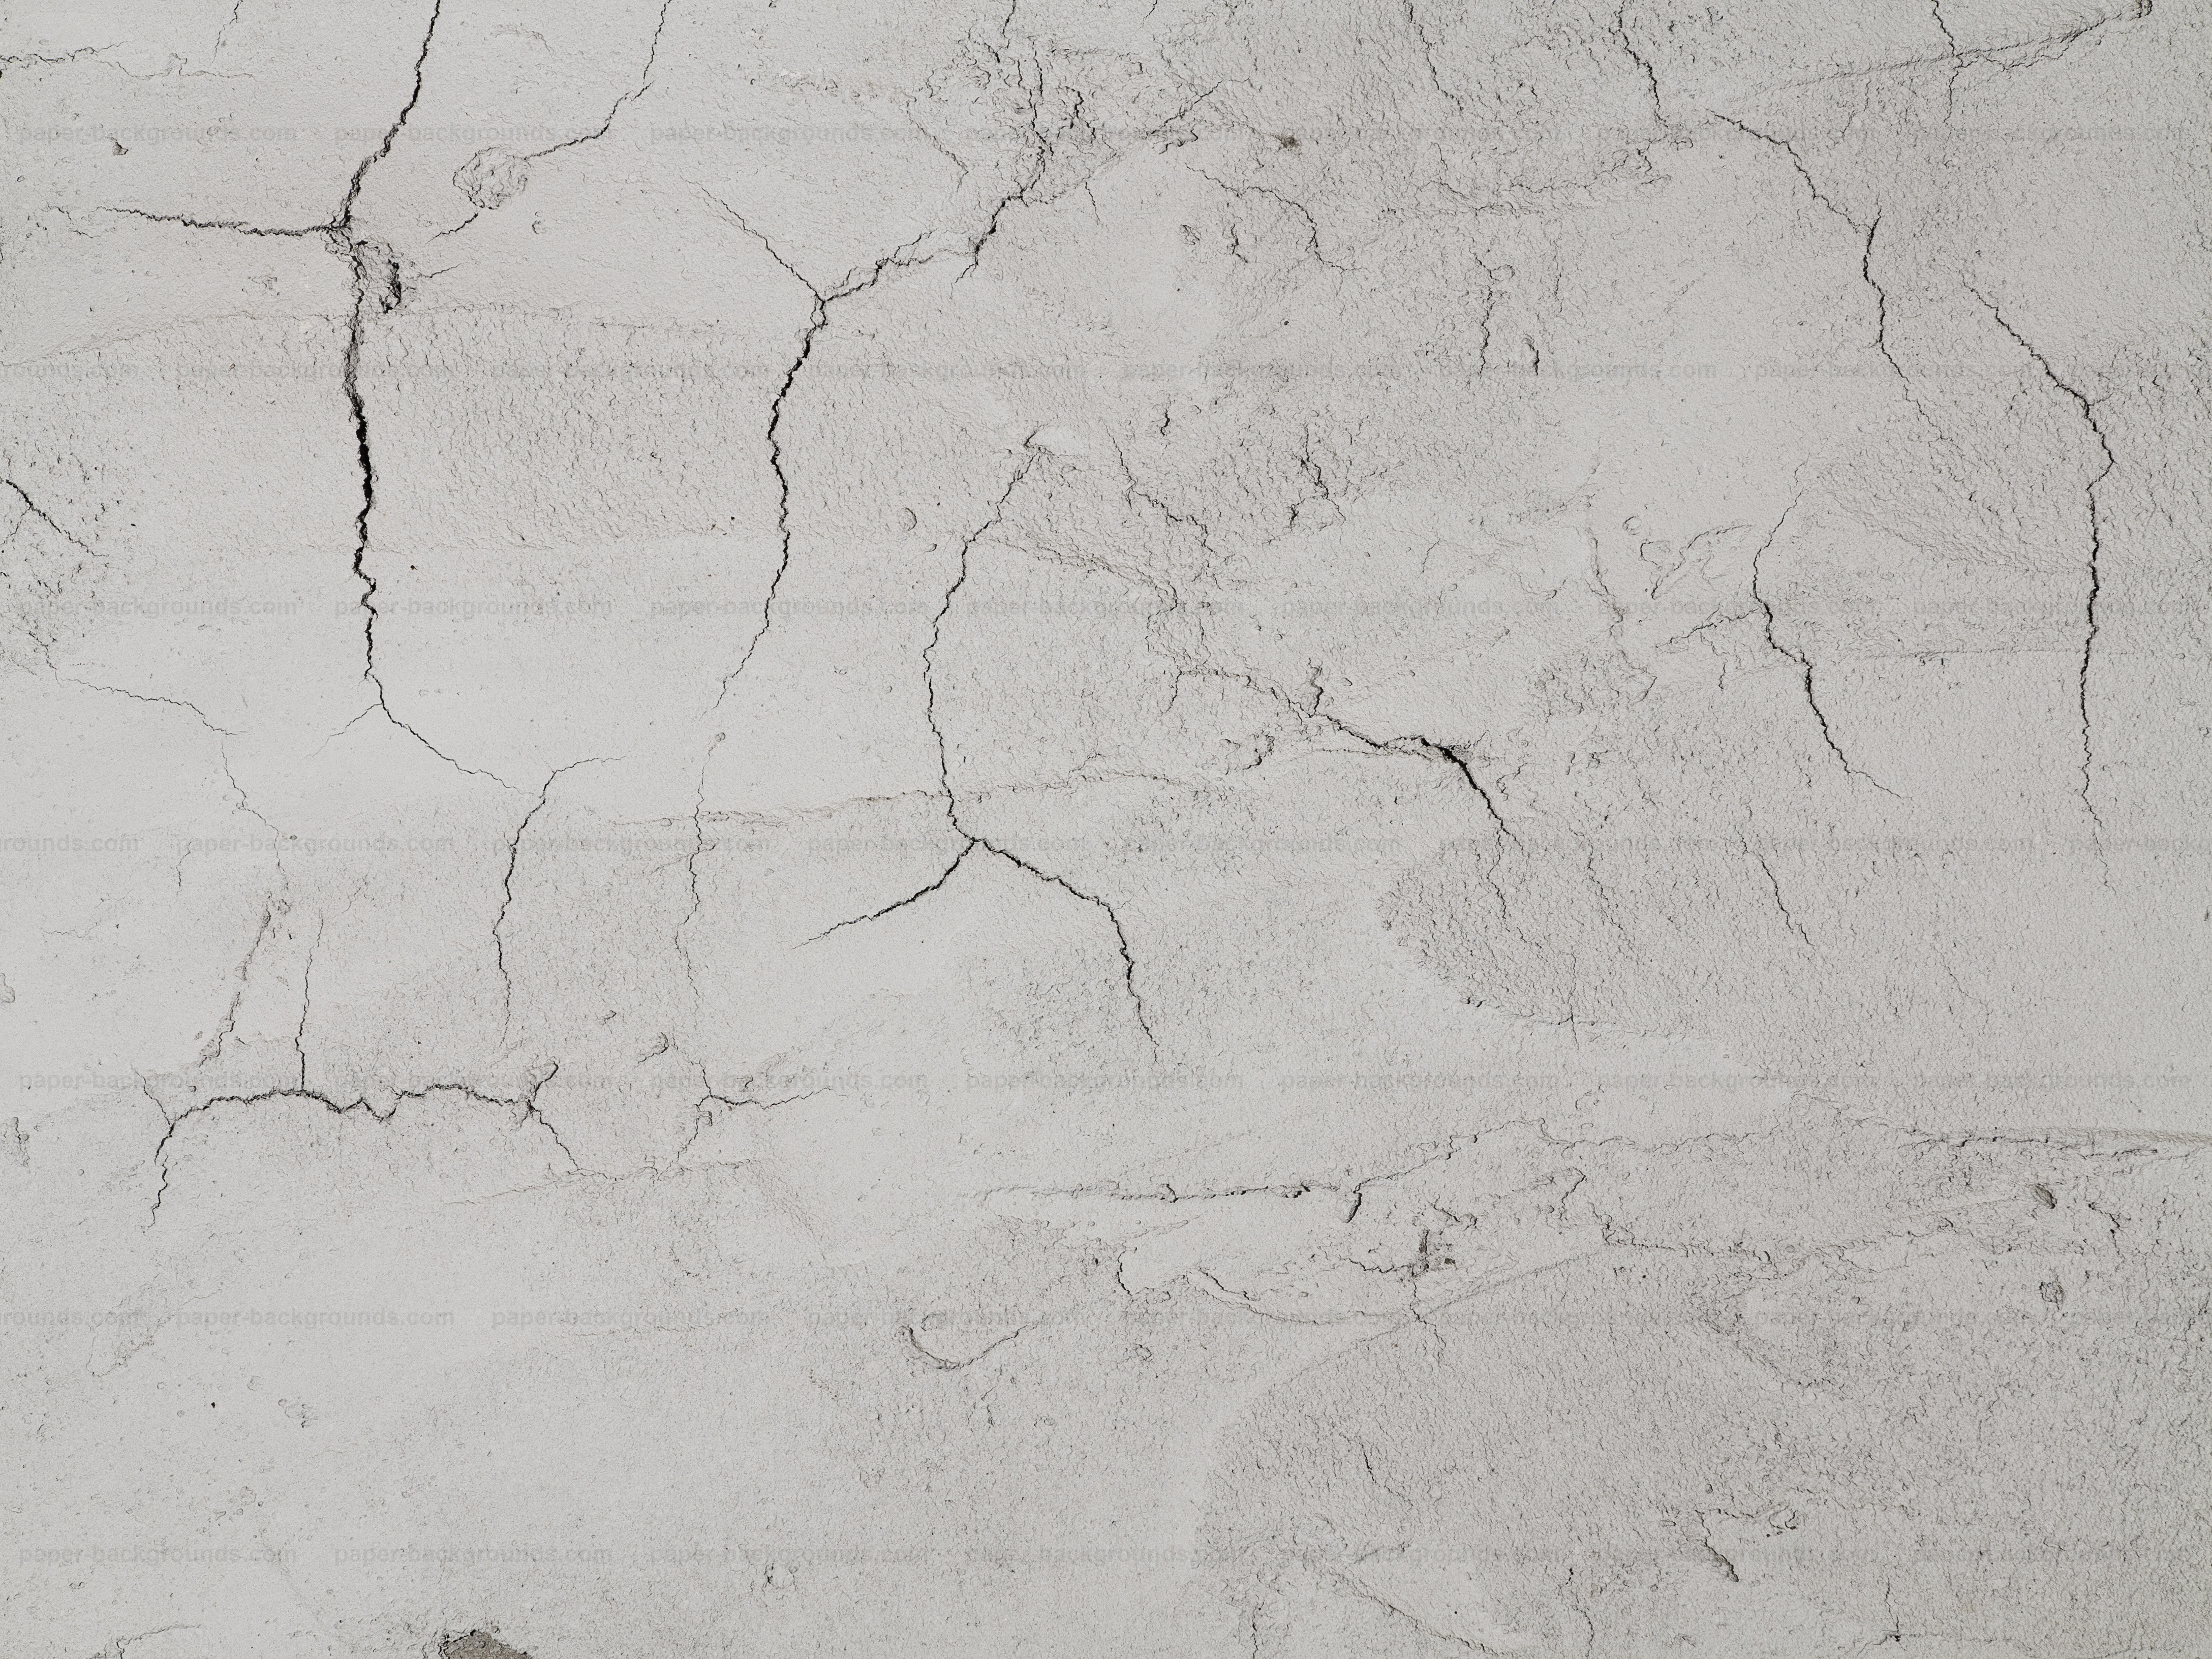 Paper Backgrounds | Cracked Concrete Wall Texture